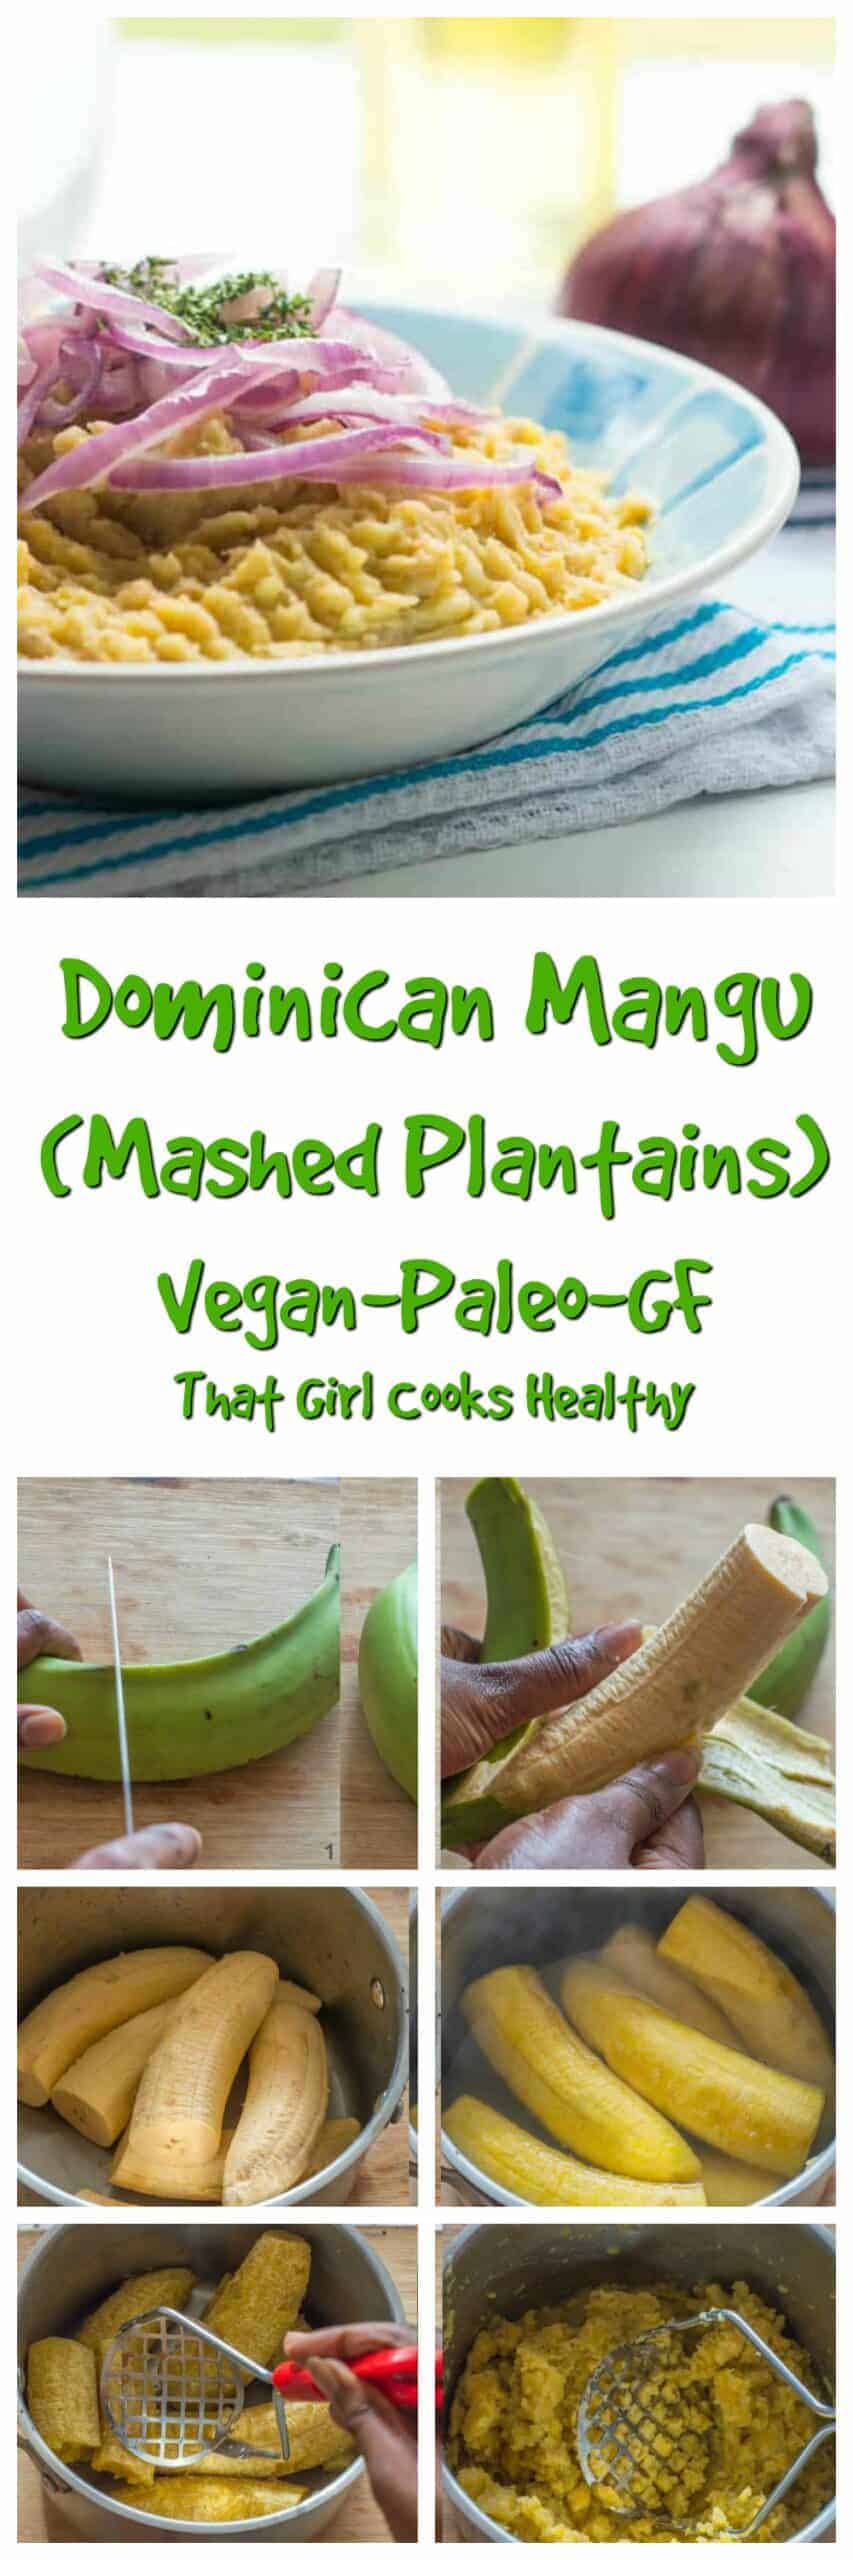 Dominican Mangu Mashed Plantains That Girl Cooks Healthy